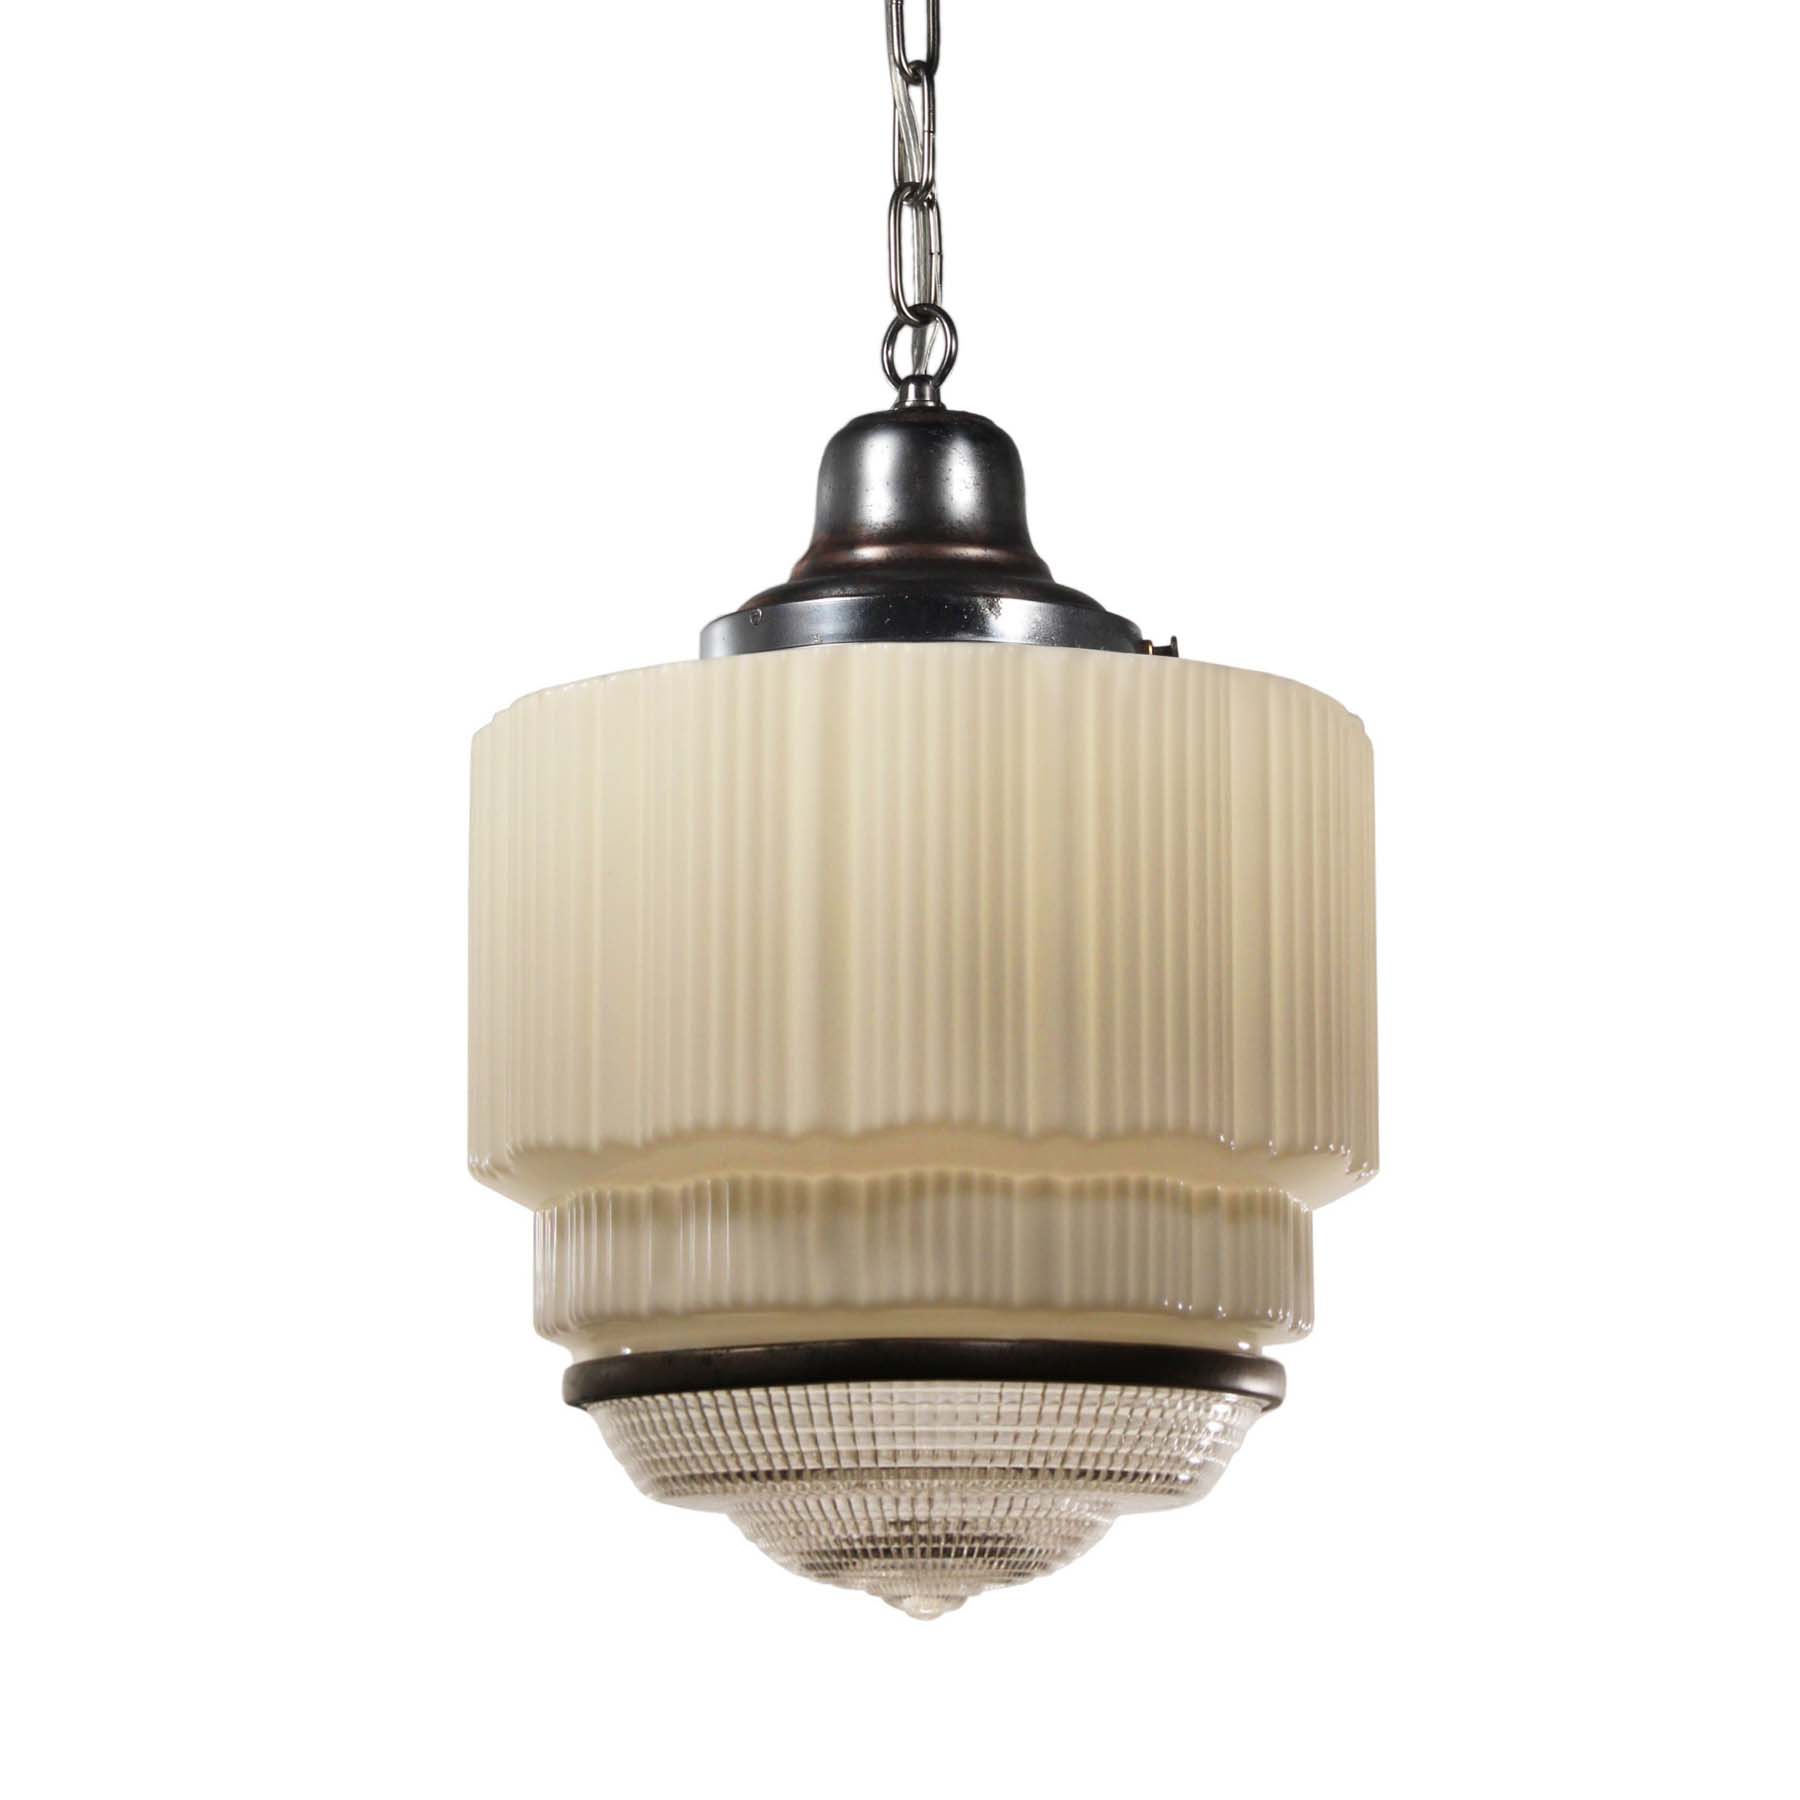 SOLD Large Antique Art Deco Skyscraper Pendant Light with Two-Part Prismatic Shade-0